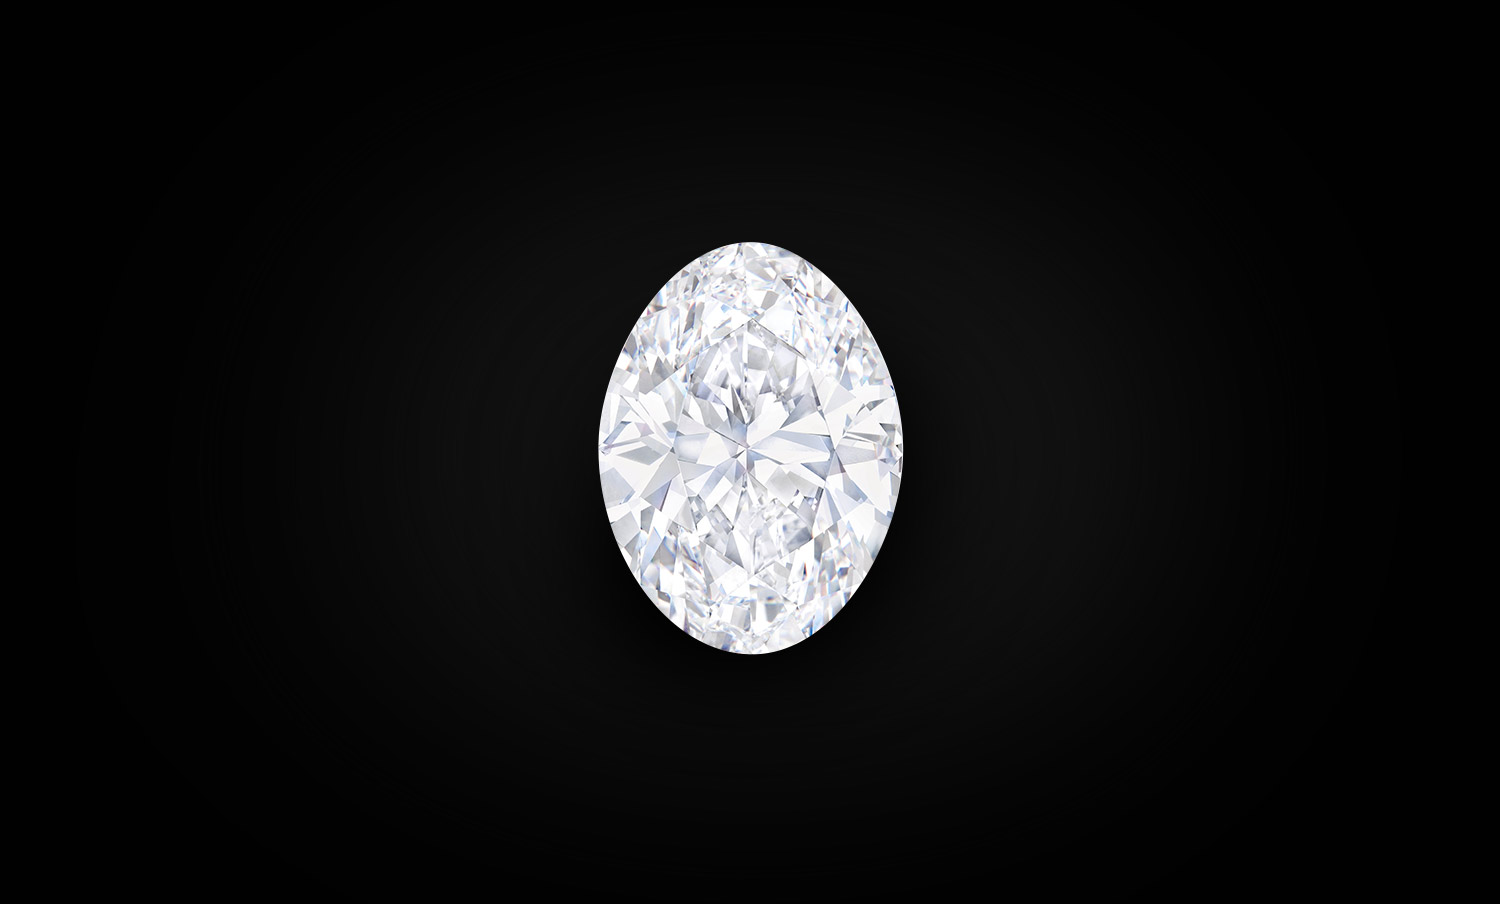 You are currently viewing Nir Livnat: The 88.22 Carat Oval Diamond | Diacore